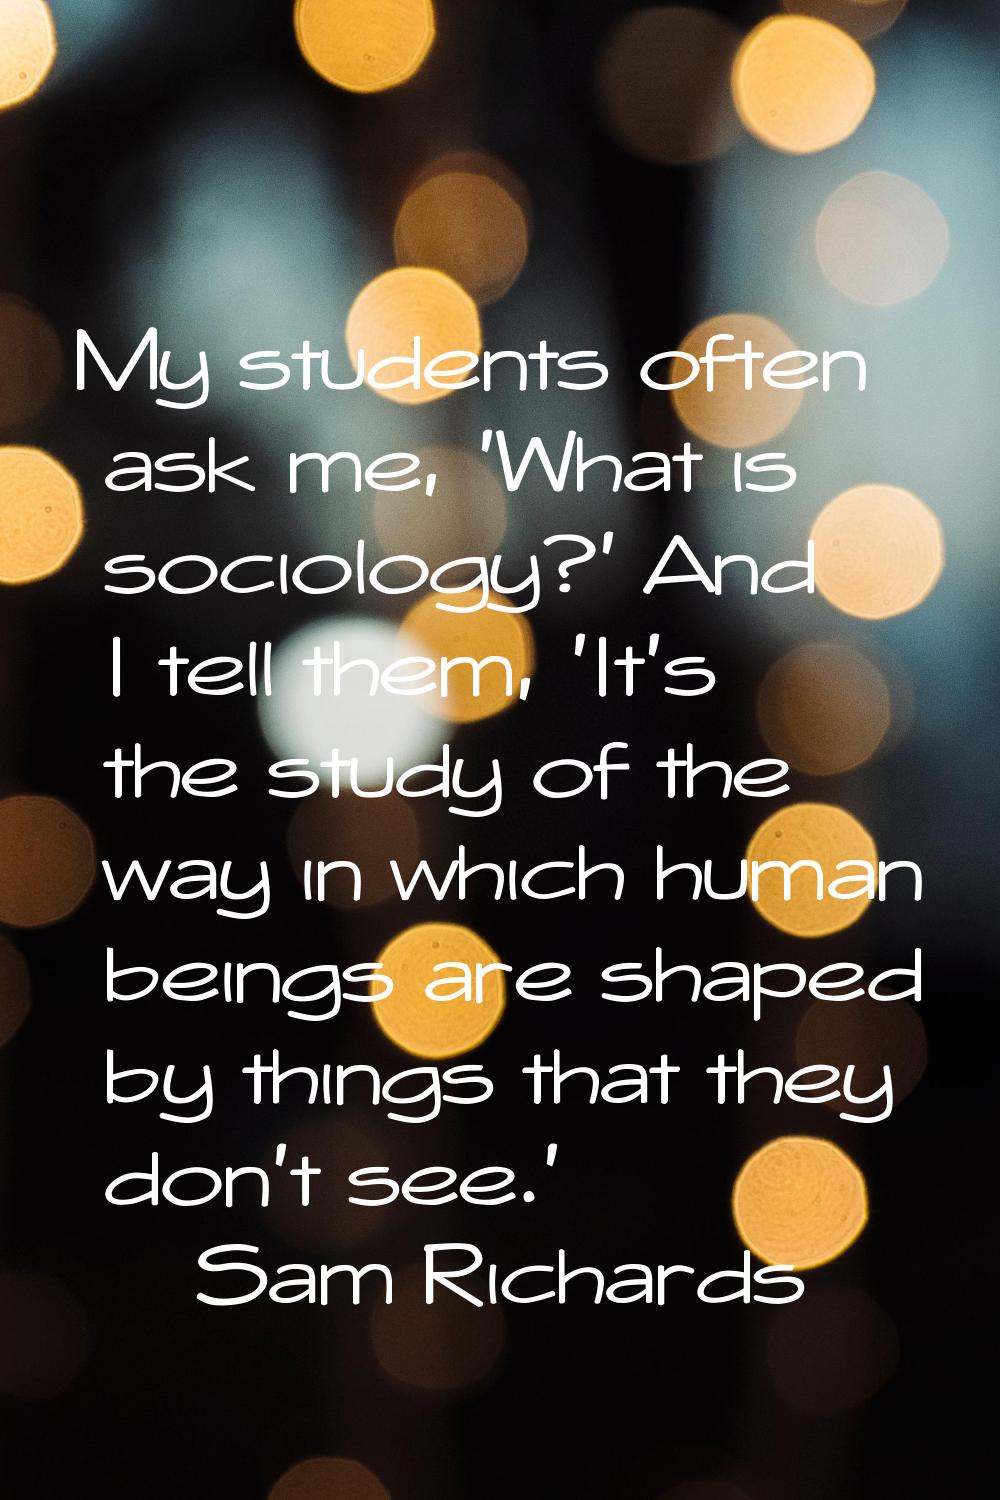 My students often ask me, 'What is sociology?' And I tell them, 'It's the study of the way in which